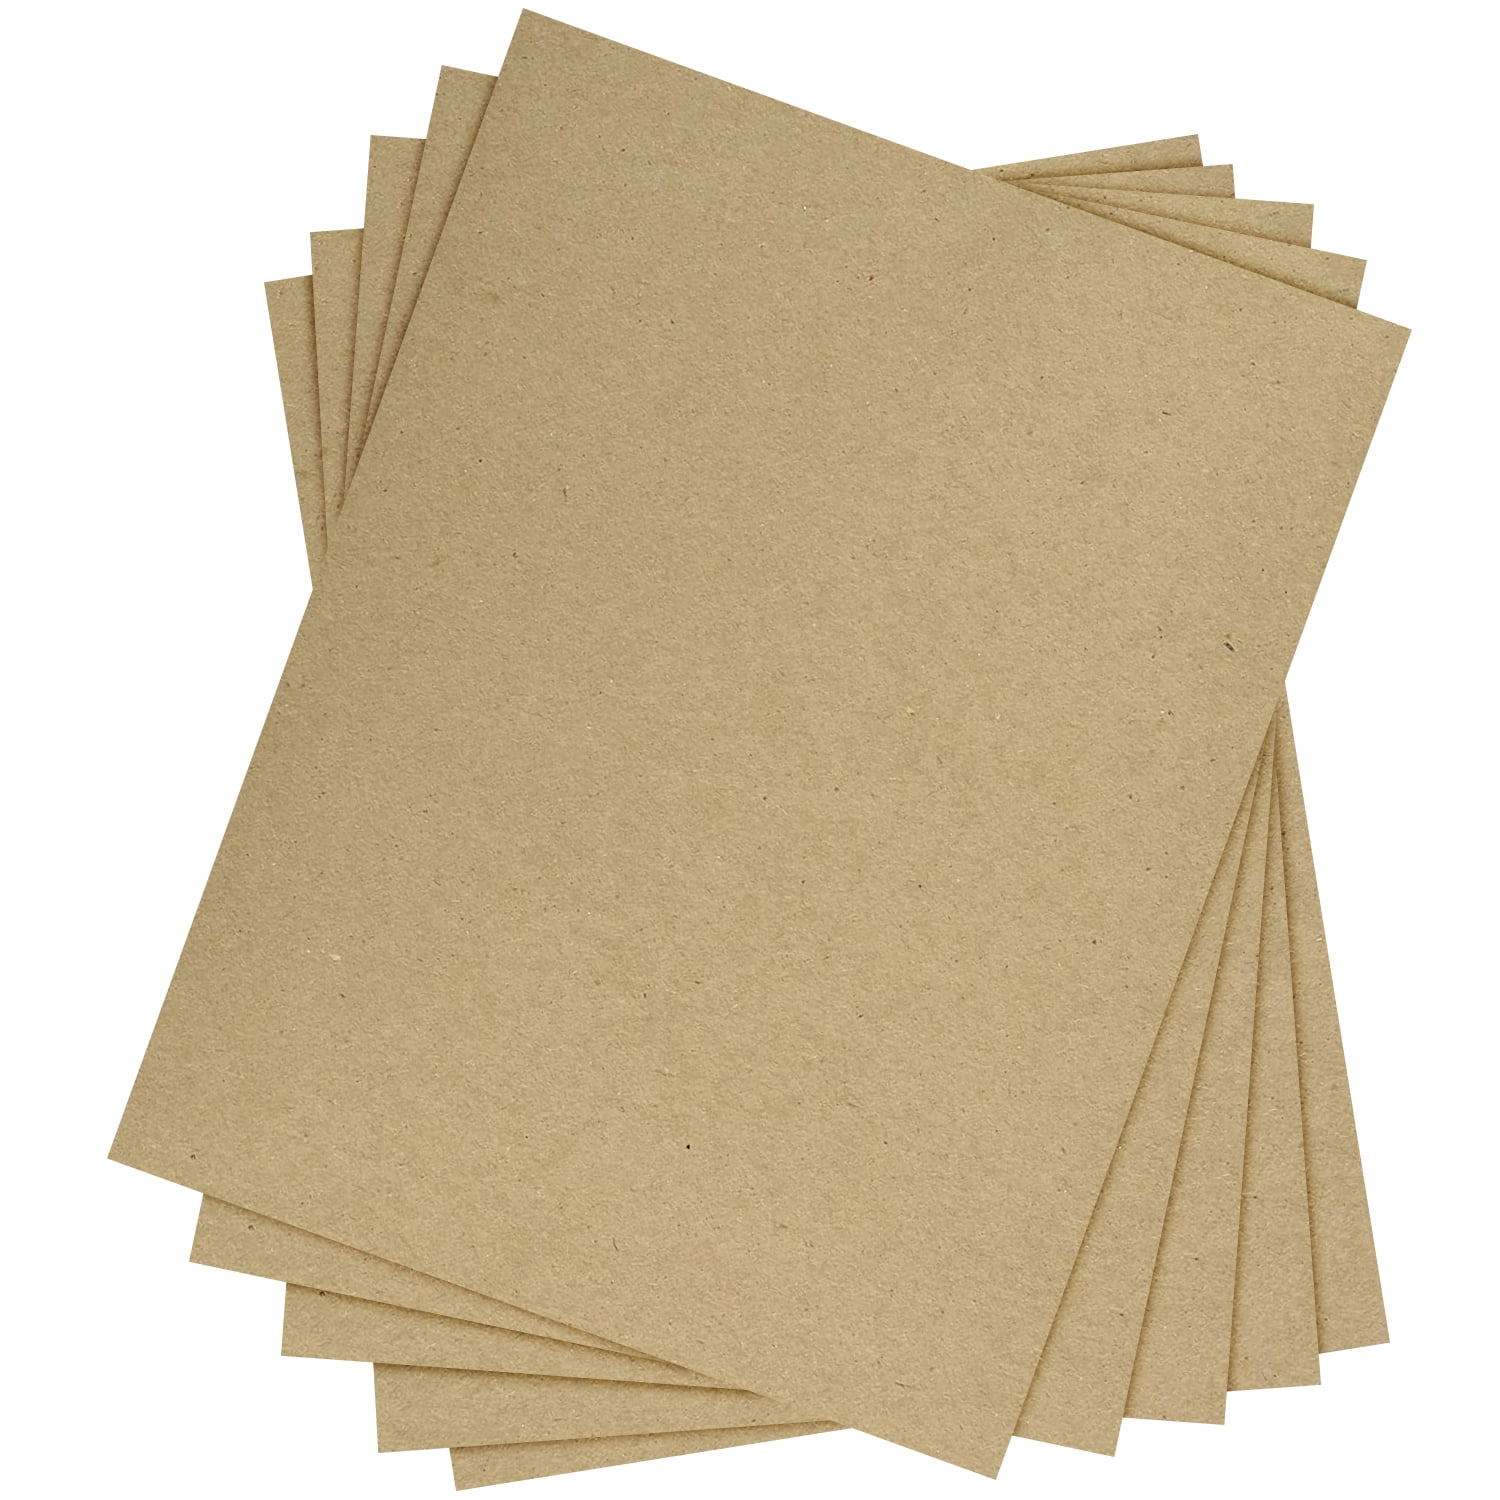 Brown Kraft Chipboard Medium Weight 30pt (Point) Cardboard Scrapbook Sheets | Great for Arts & Crafts, Scrapbooking, Packaging, Notepad Backing, Gift